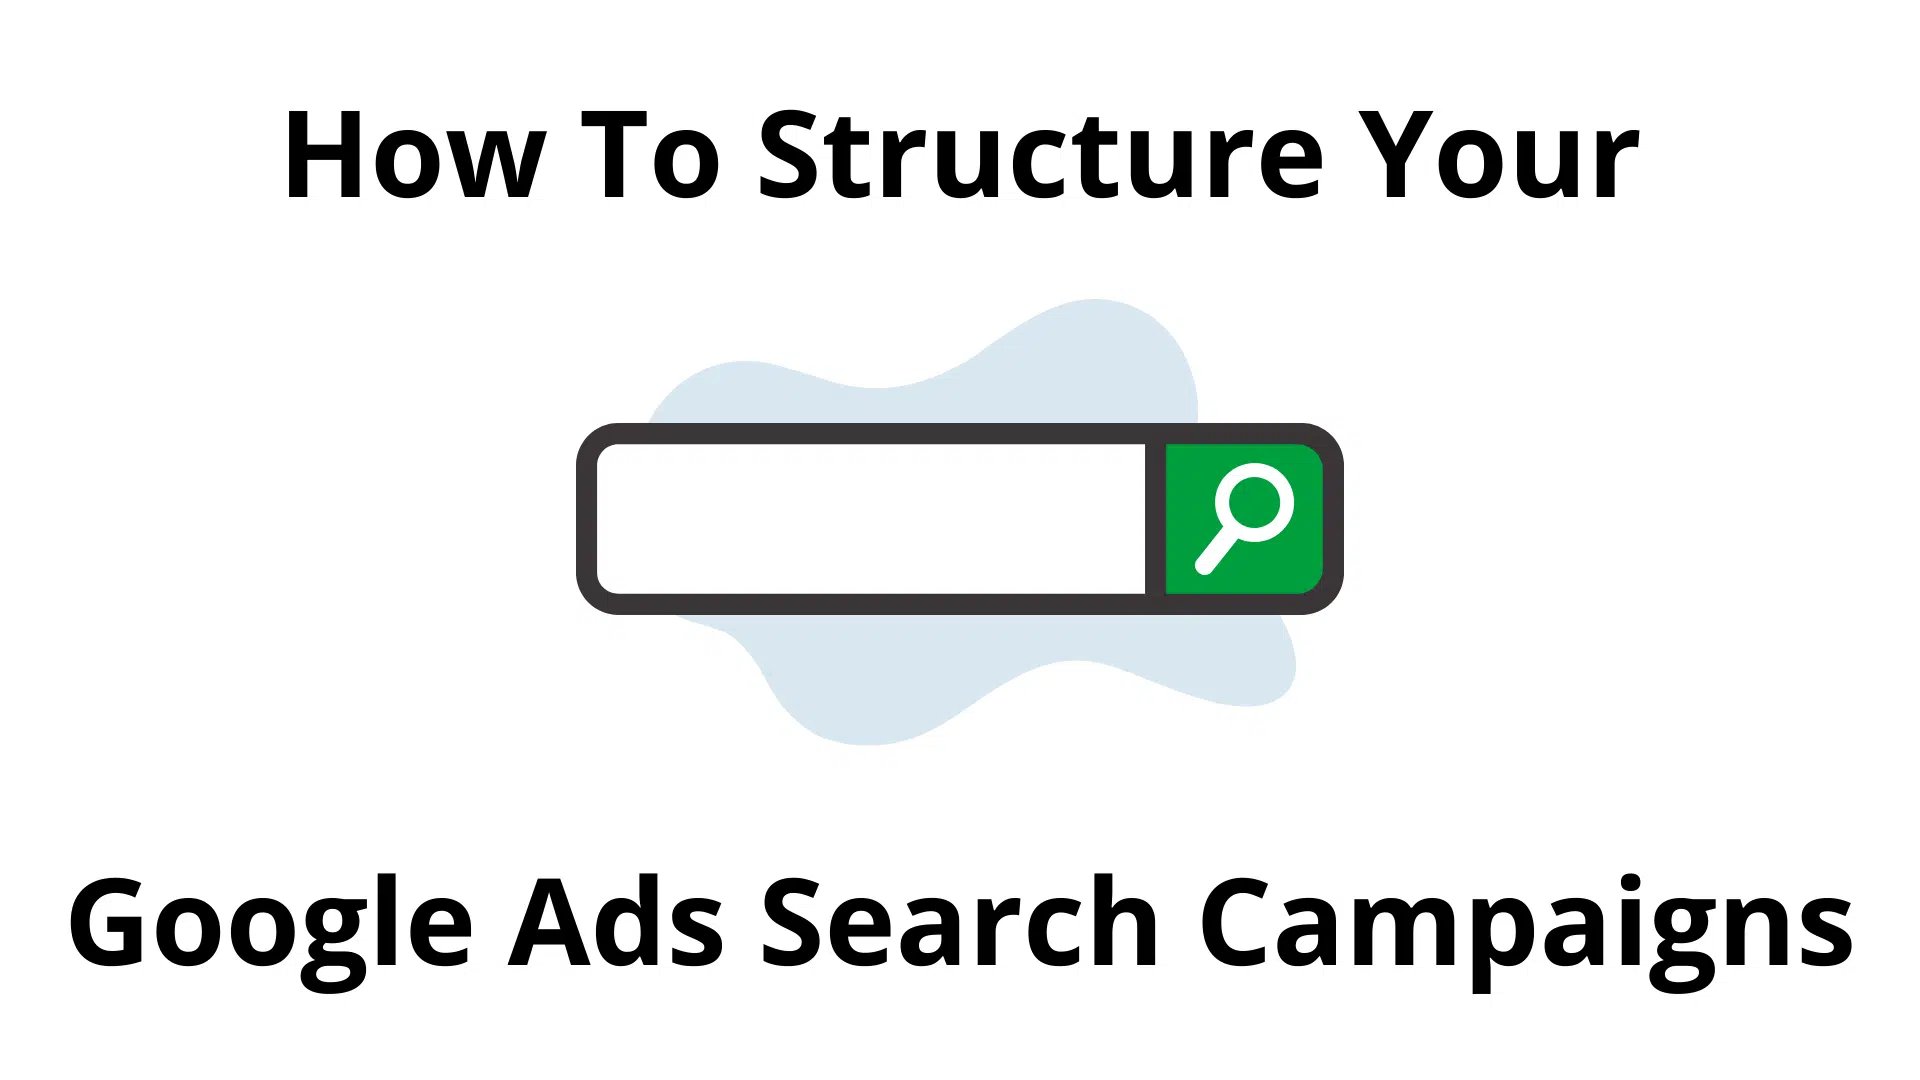 How to Structure Google Ads Search Campaigns